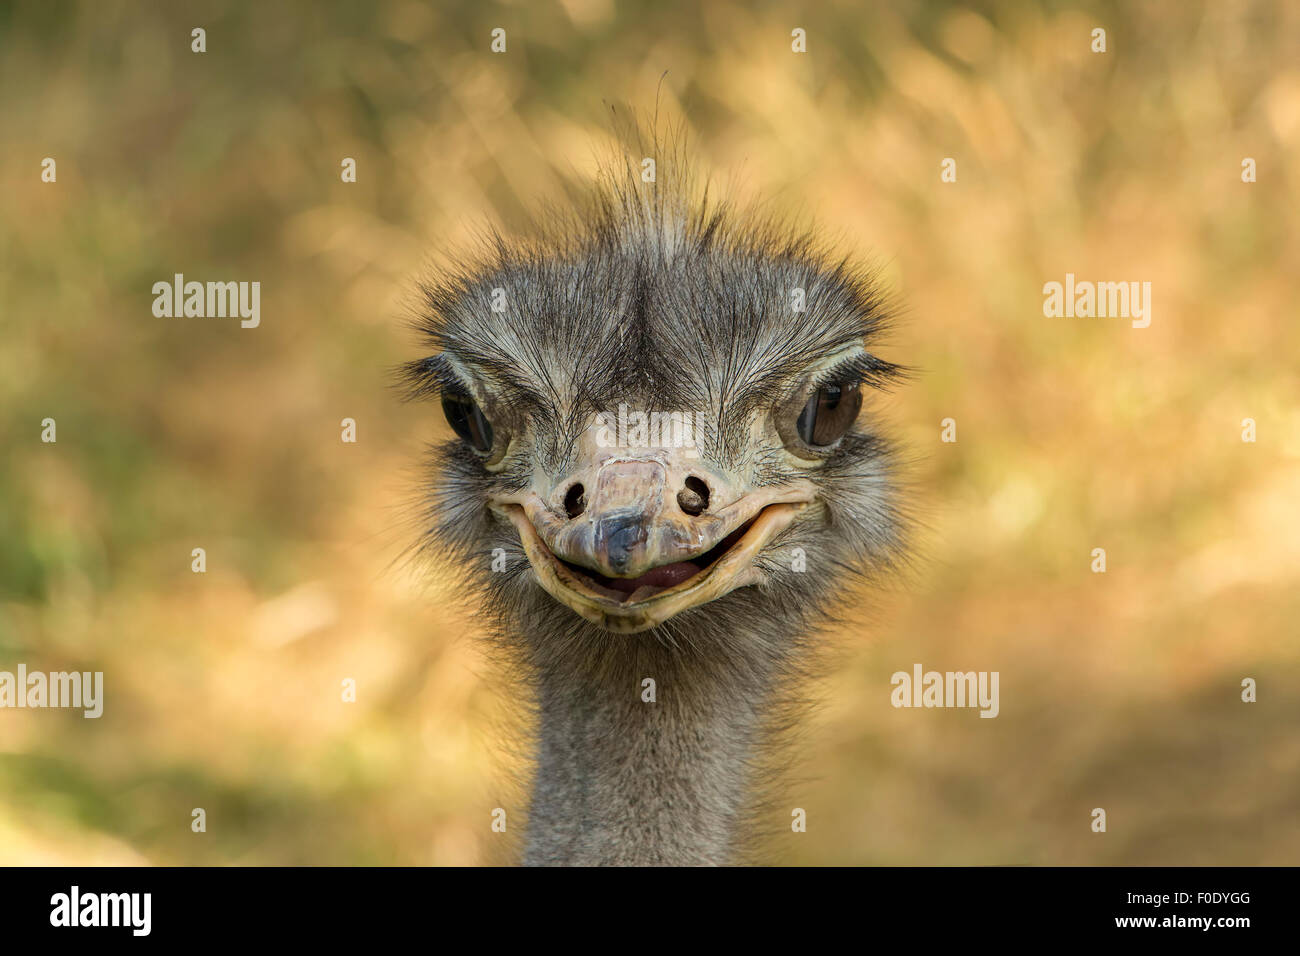 Portrait of Emu with open mouth. Stock Photo